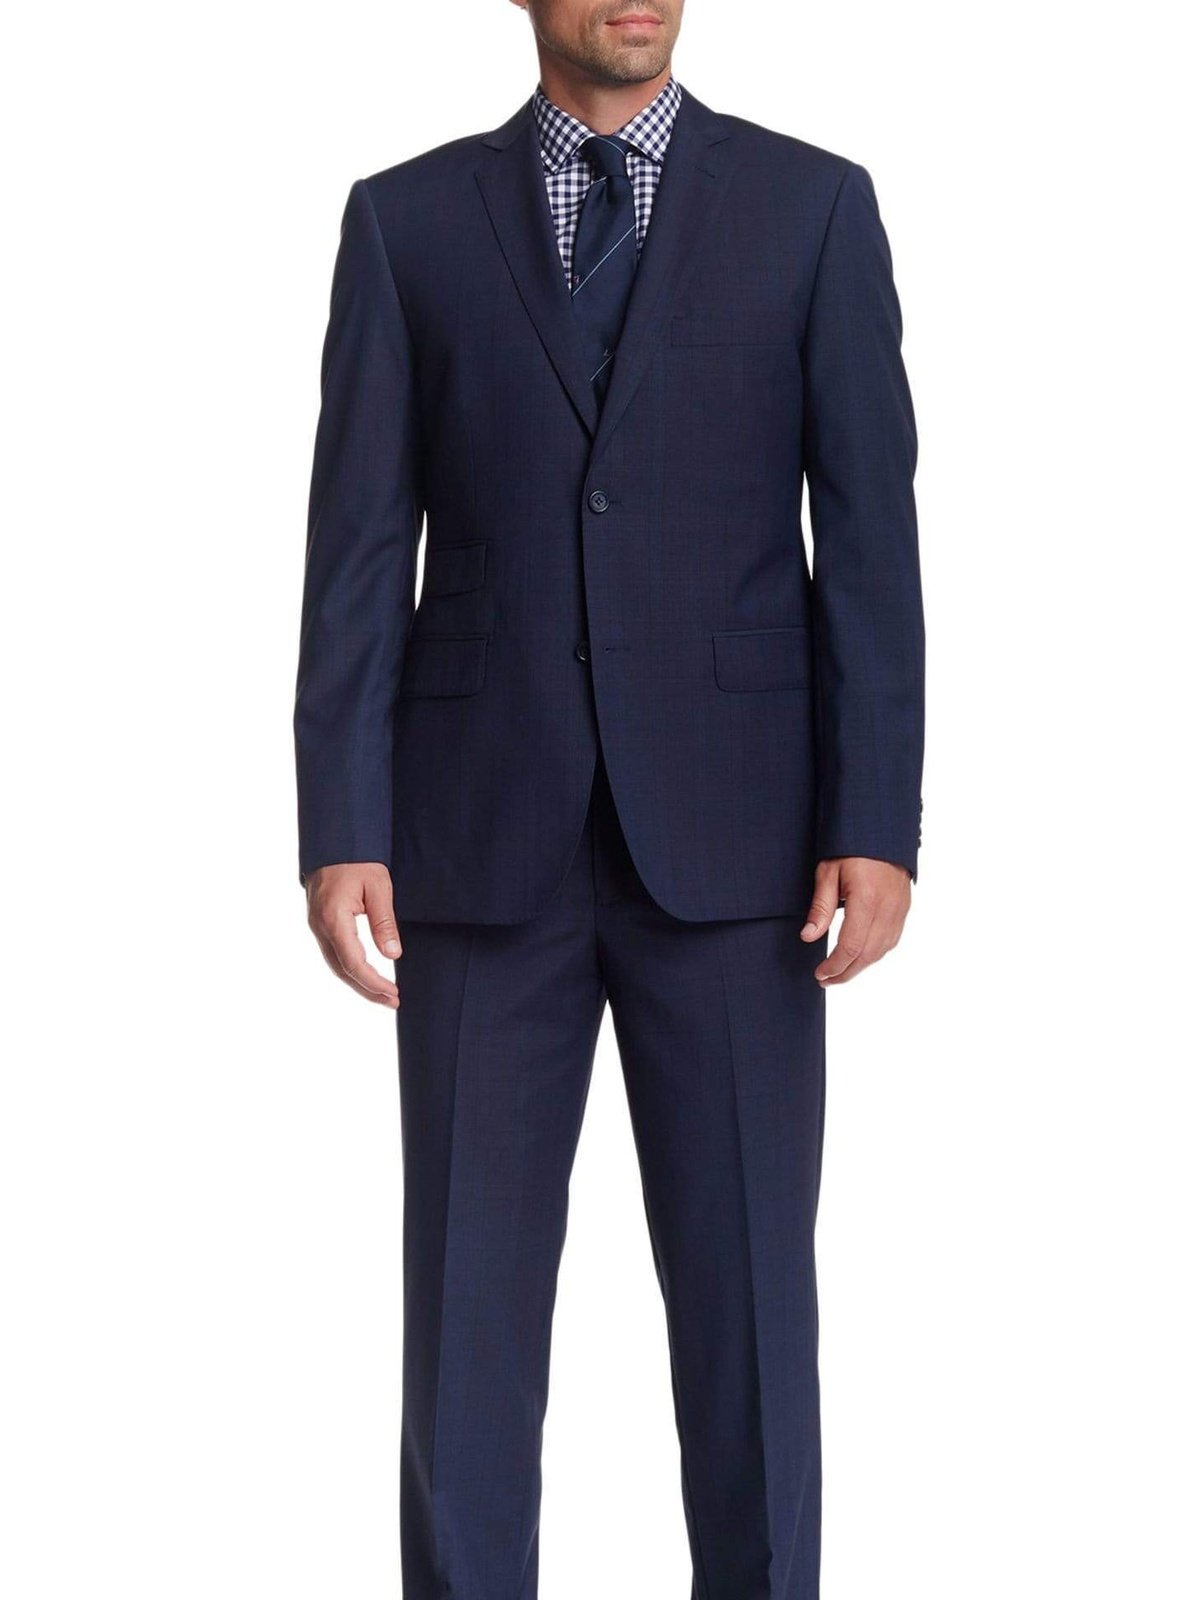 Zanetti TWO PIECE SUITS Zanetti Modern Fit Navy Blue Plaid Two Button Wool Suit With Ticket Pocket